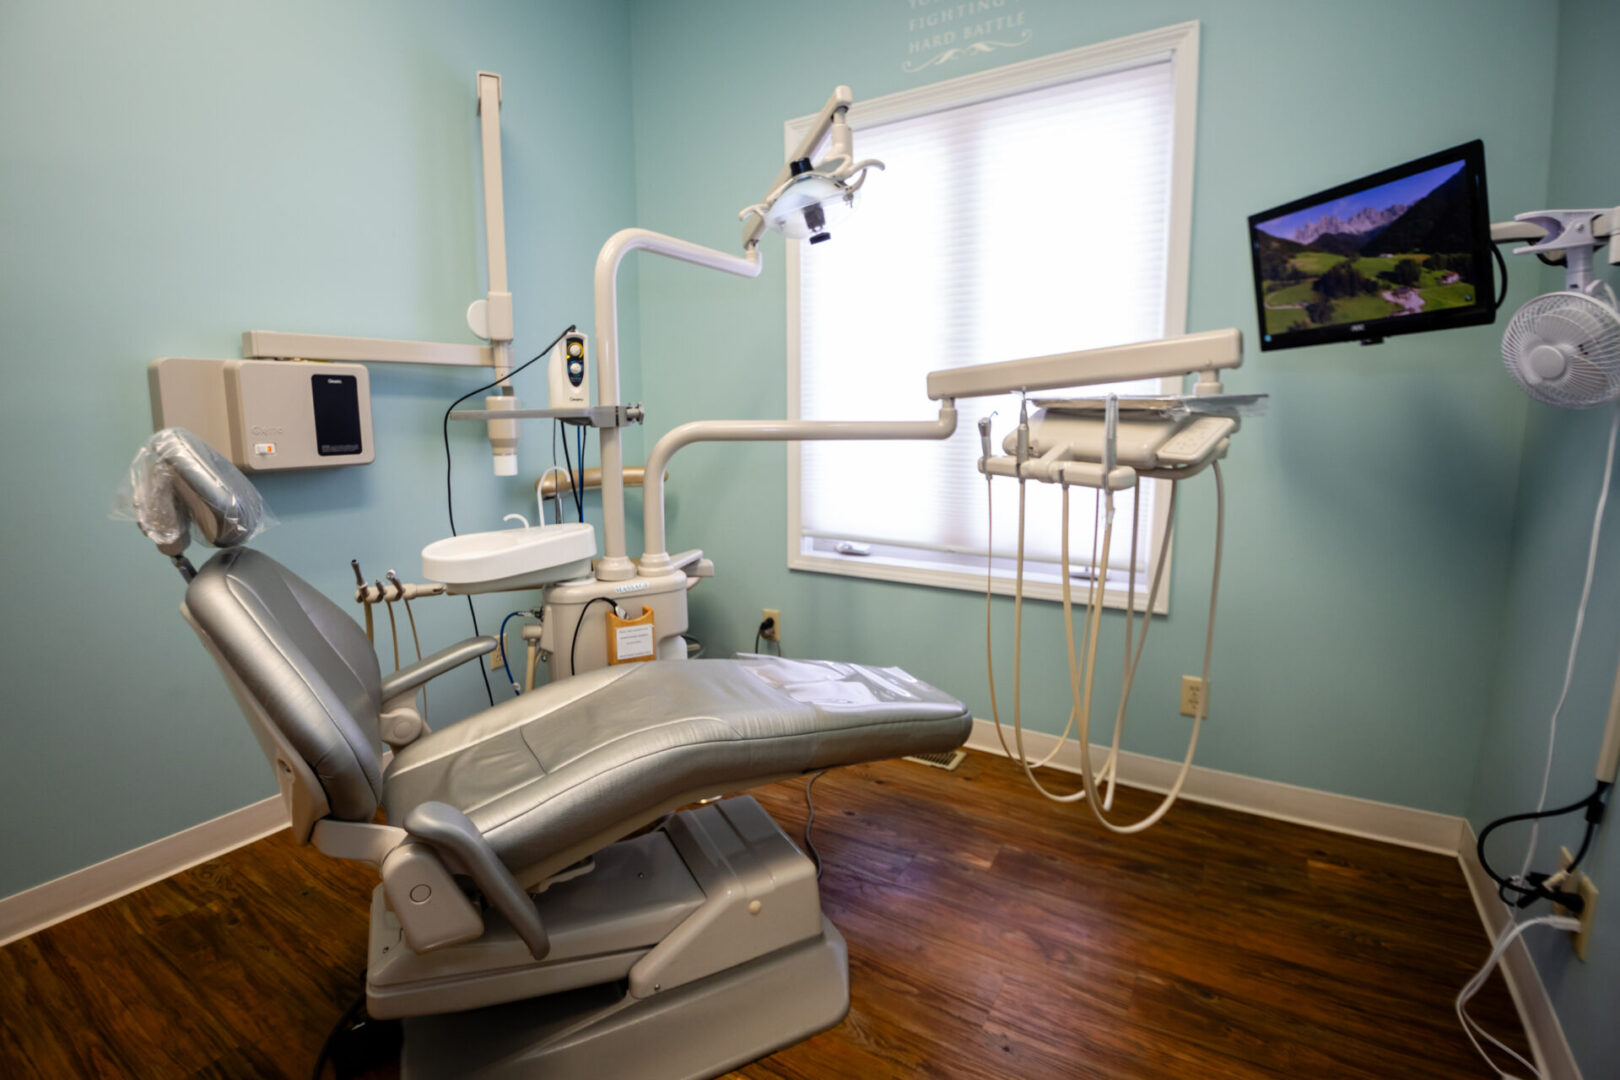 A dentist 's office with a chair and television.